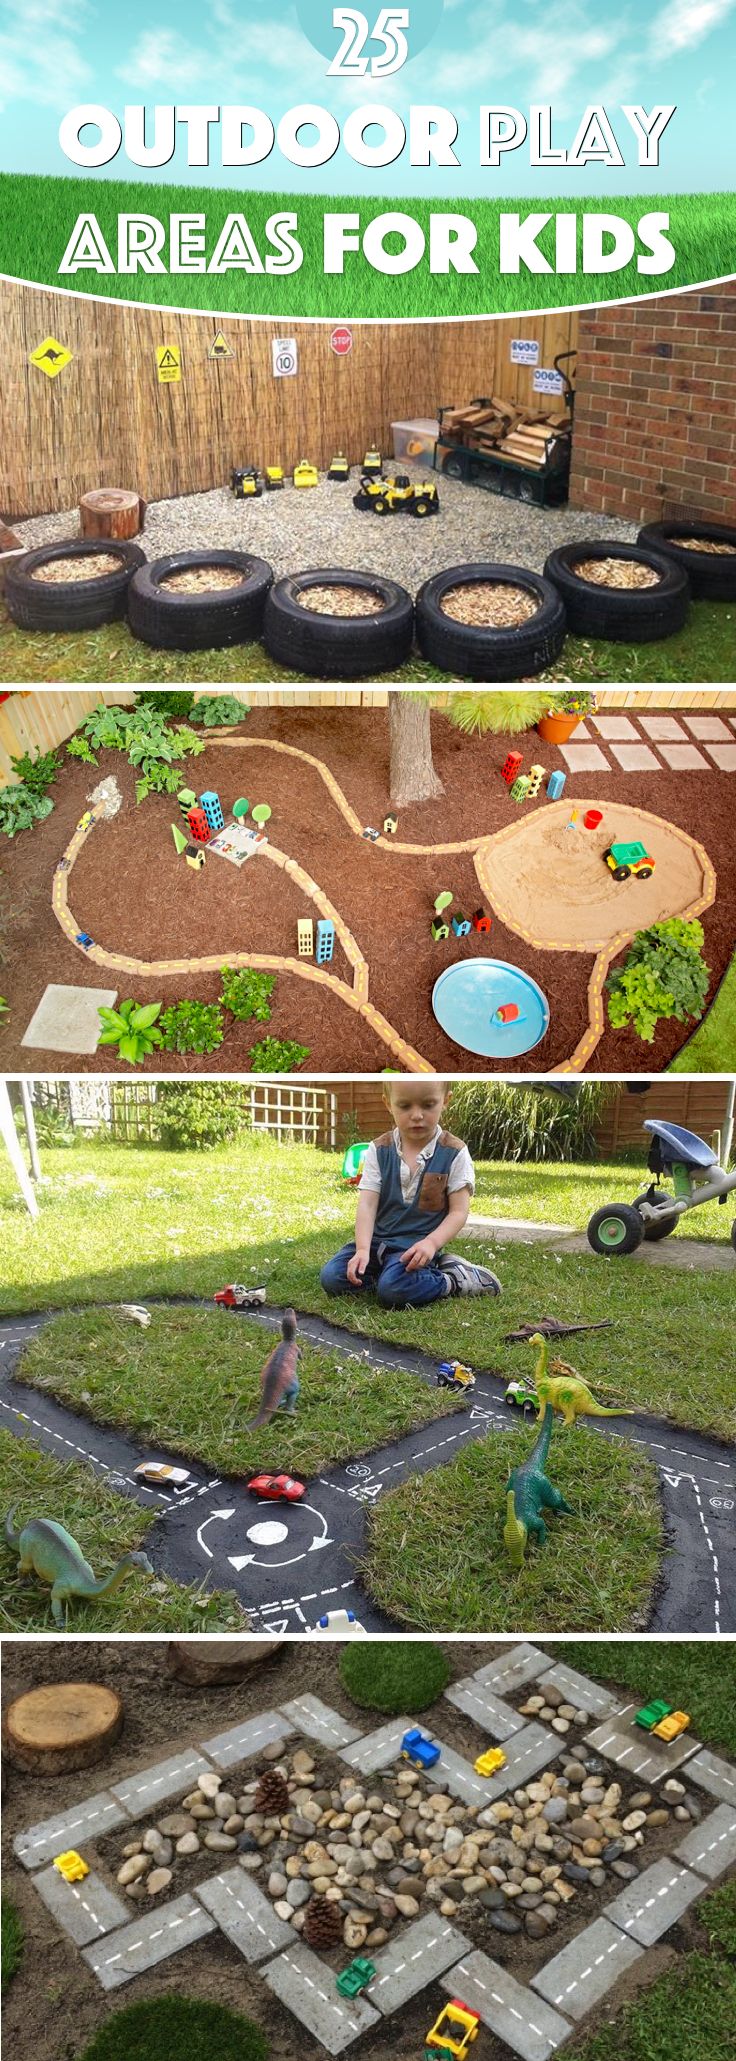 25 Outdoor Play Areas For Kids Transforming Regular Backyards Into Playtime Paradises